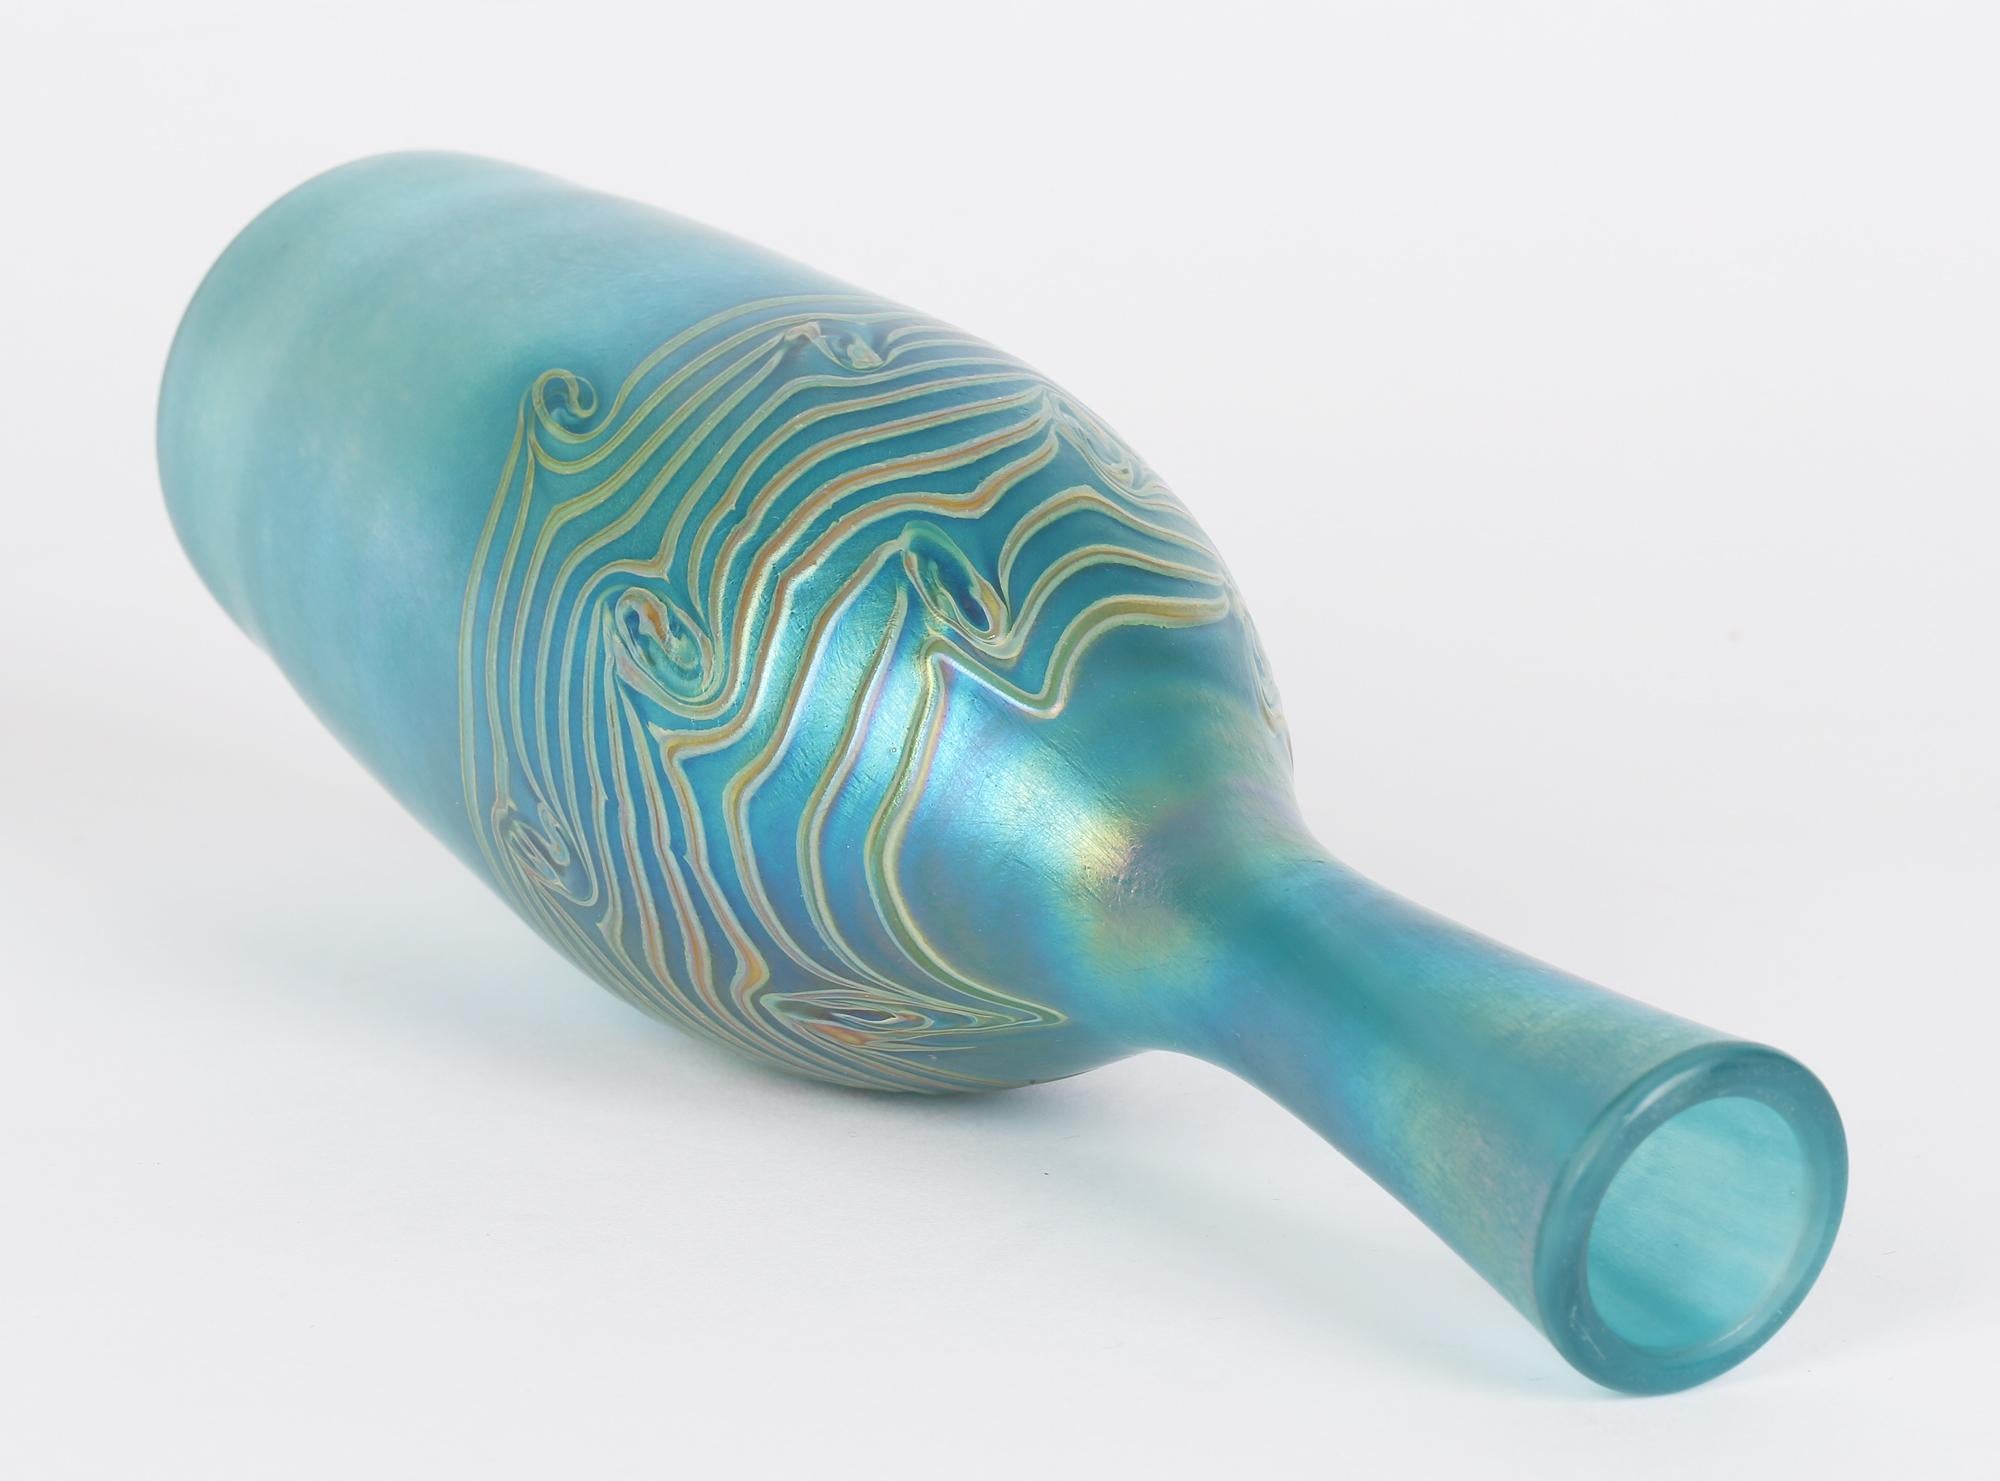 Iridescent Blue Bottle Shaped Art Glass Vase with Peacock Feather Trailing For Sale 3